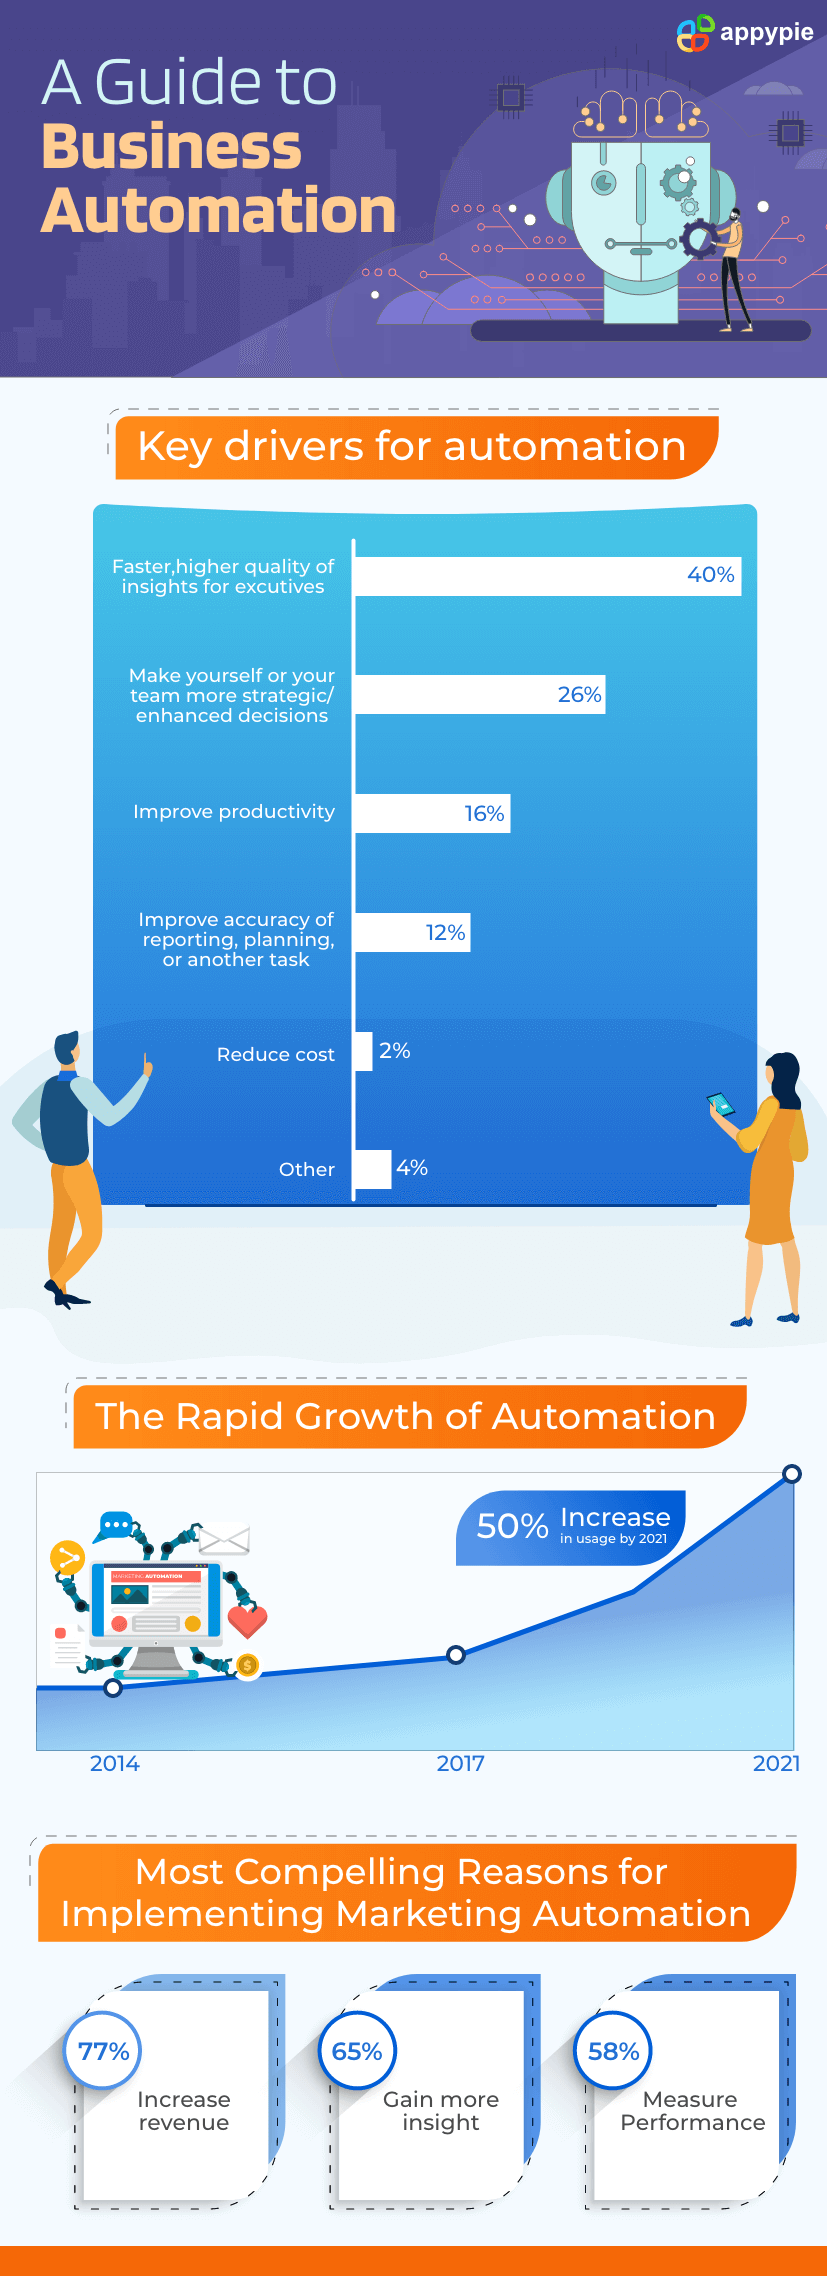 A Guide to Business Automation - Appy Pie